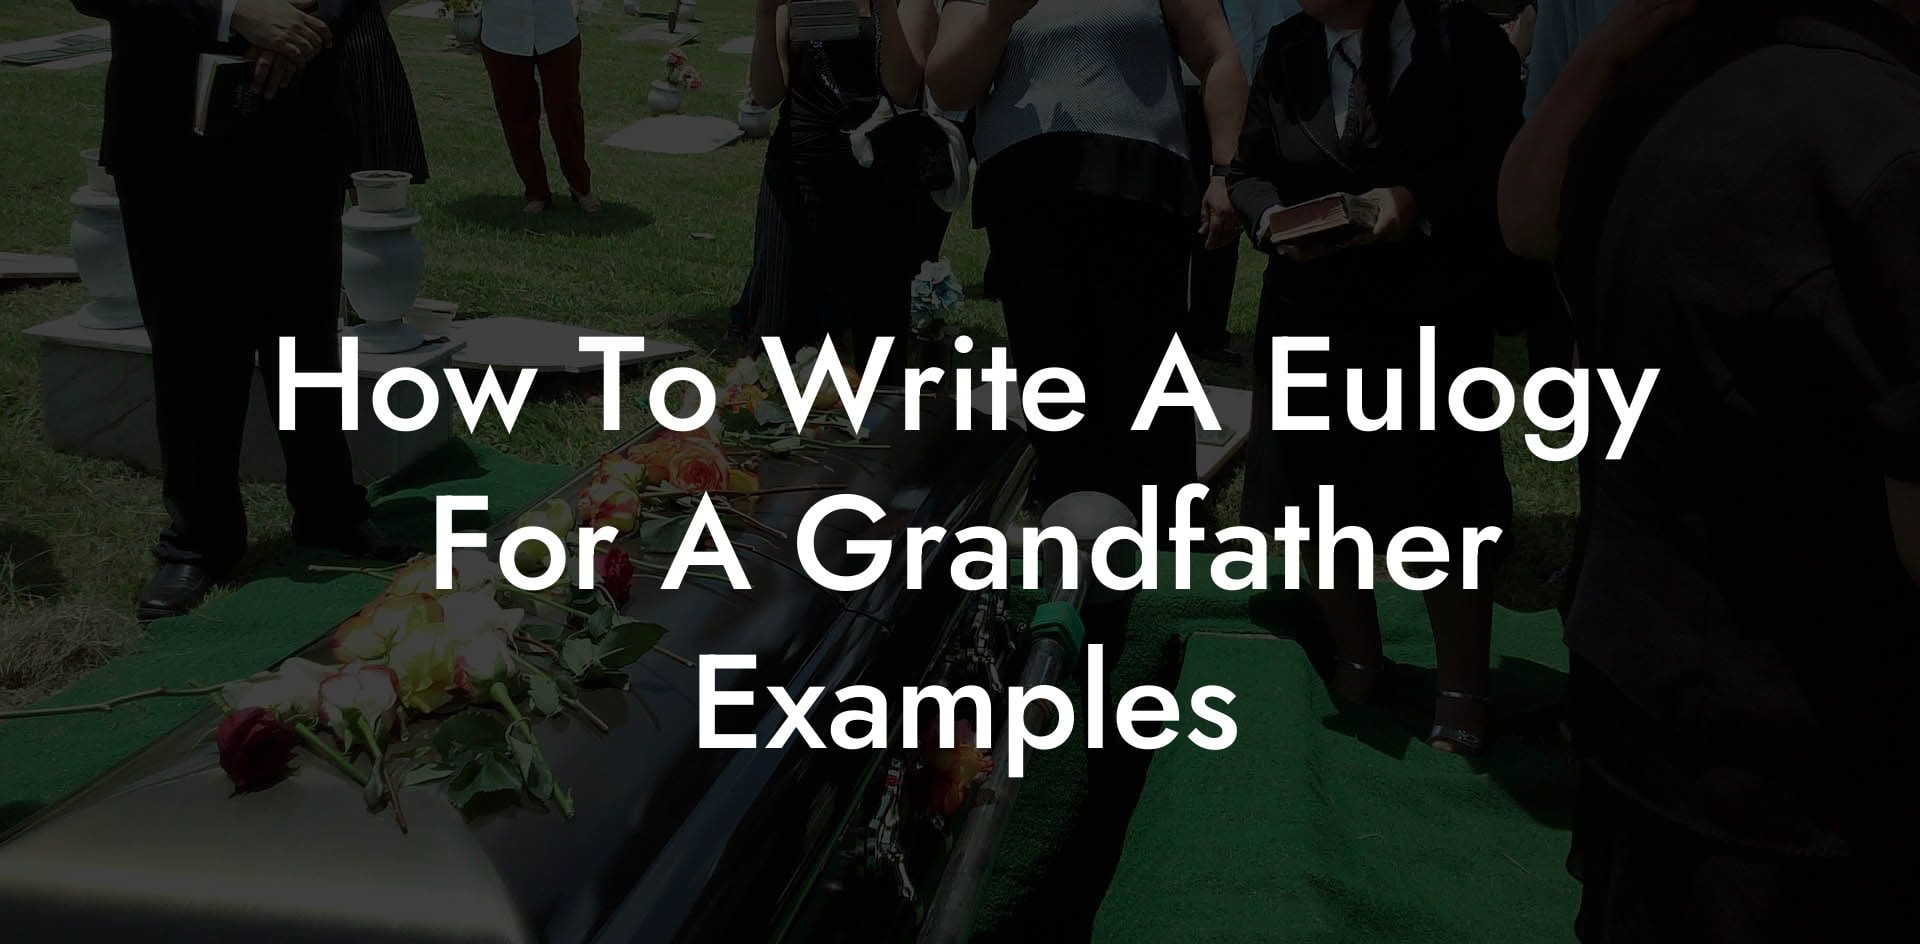 How To Write A Eulogy For A Grandfather Examples